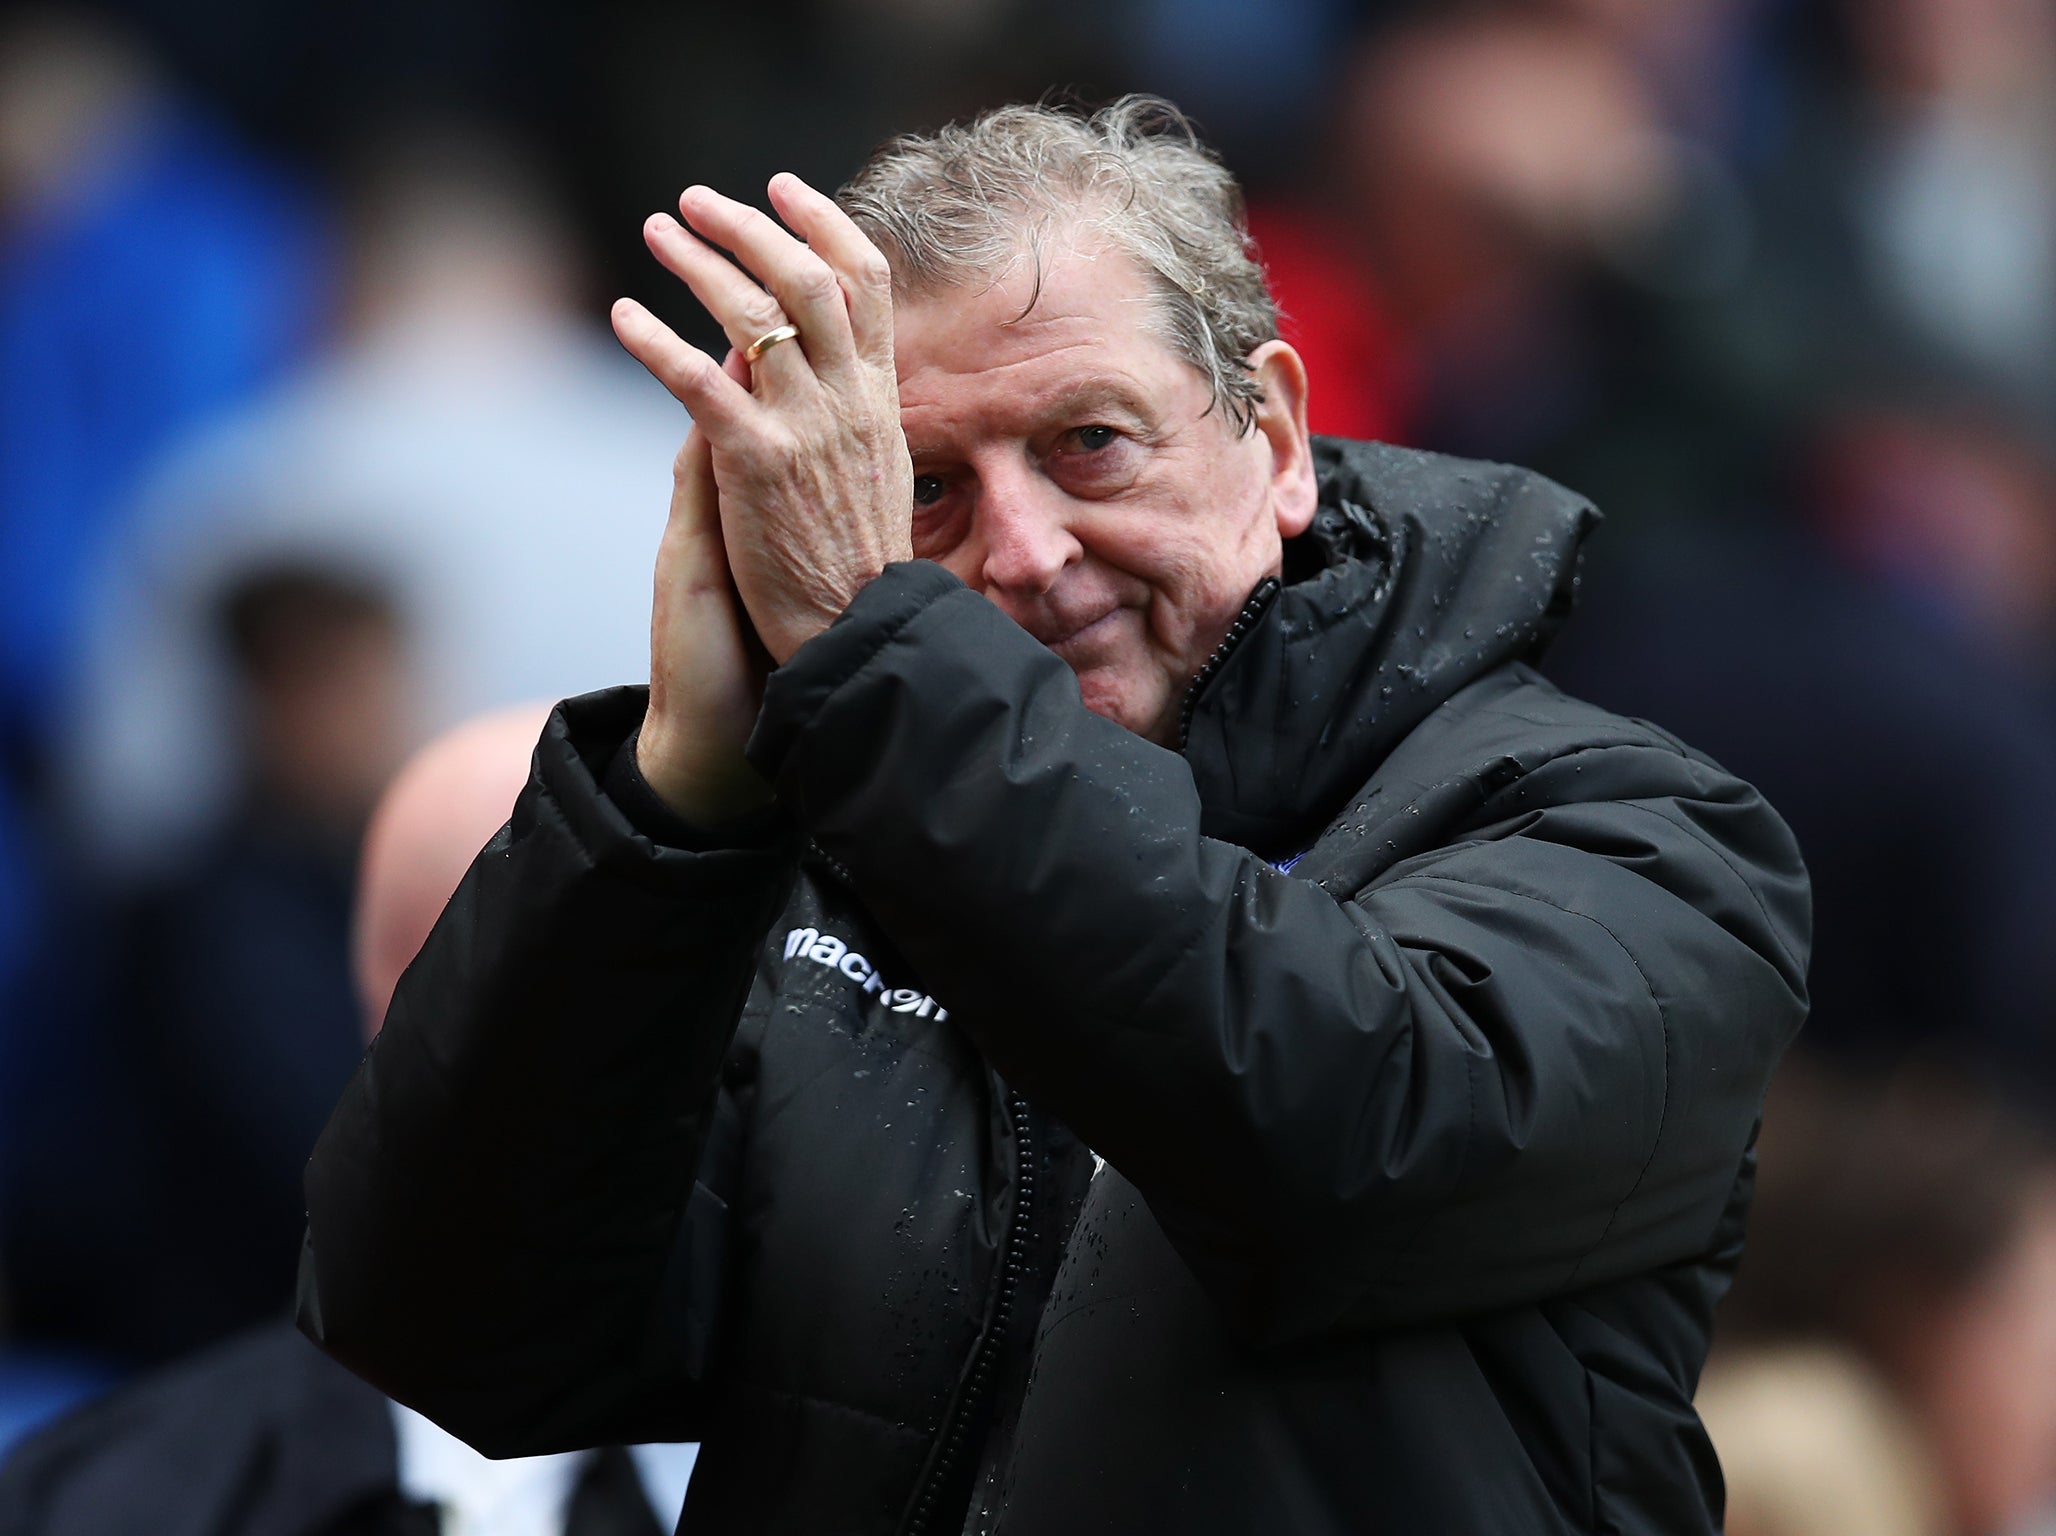 Hodgson knows that he has a tough game on his hands